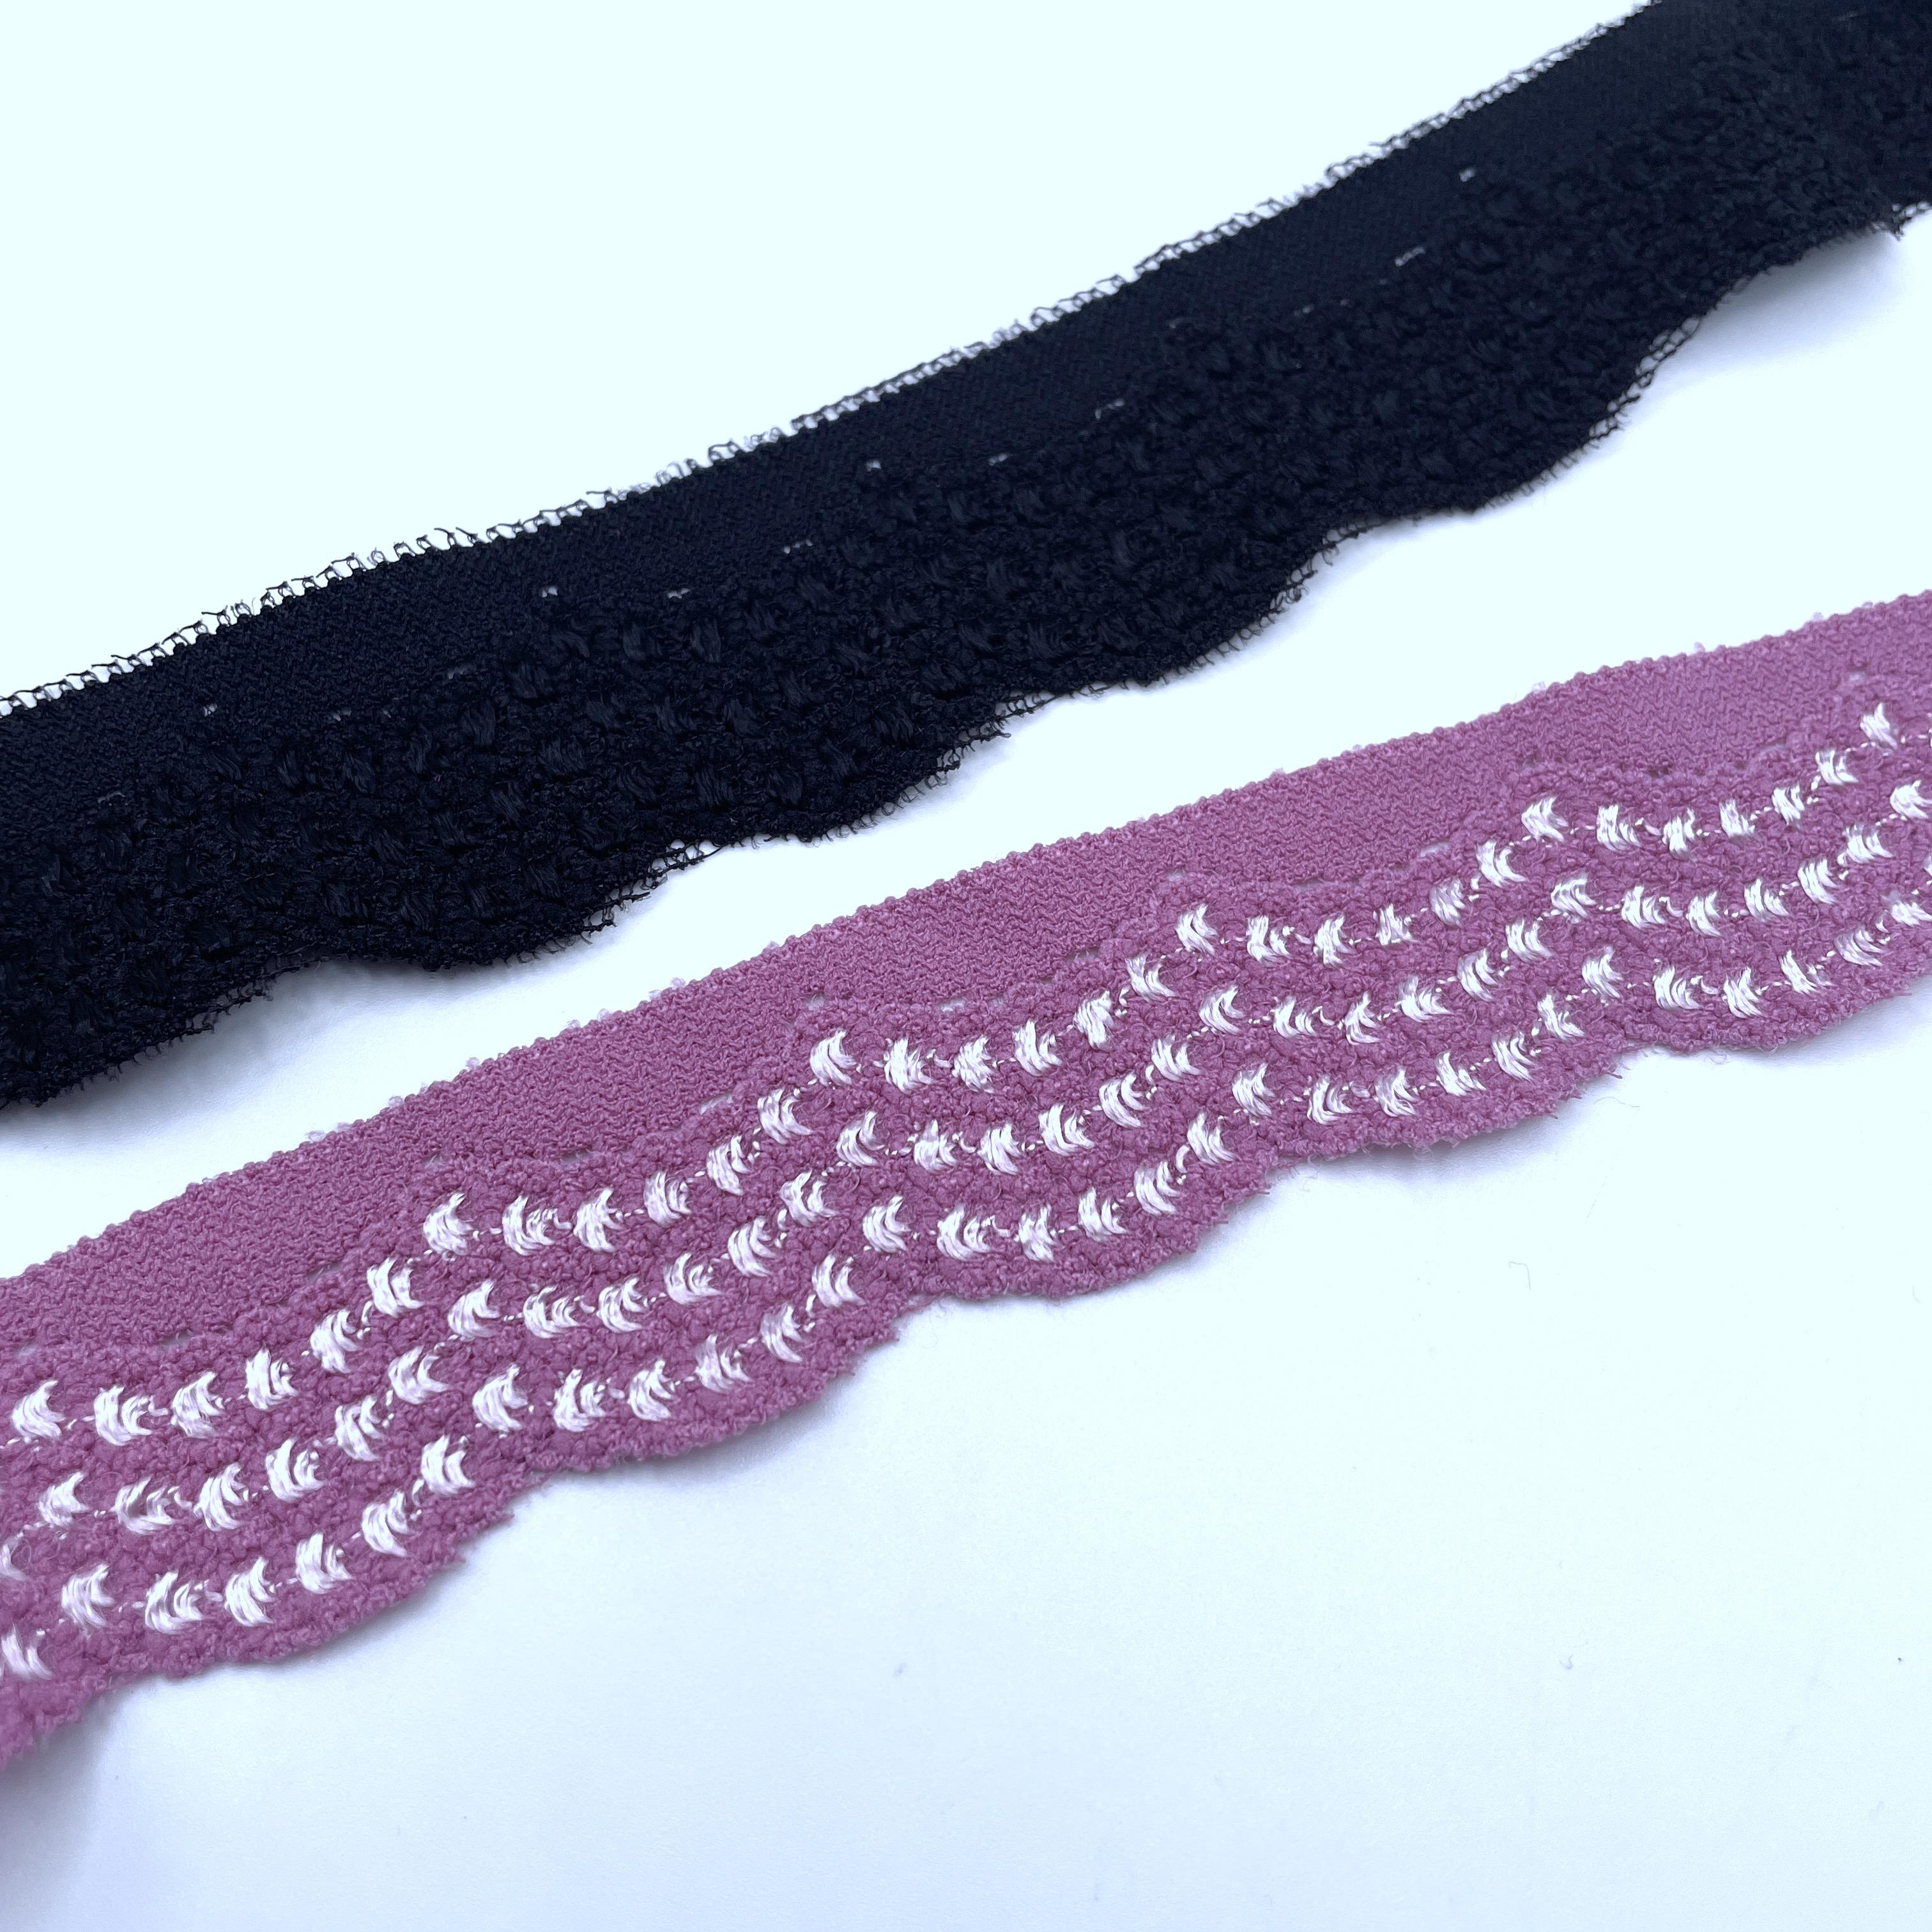 Stretch Lace - straight top/scallop edge - 30mm wide (1 3/16) - 2.5 metre  length Colour Options